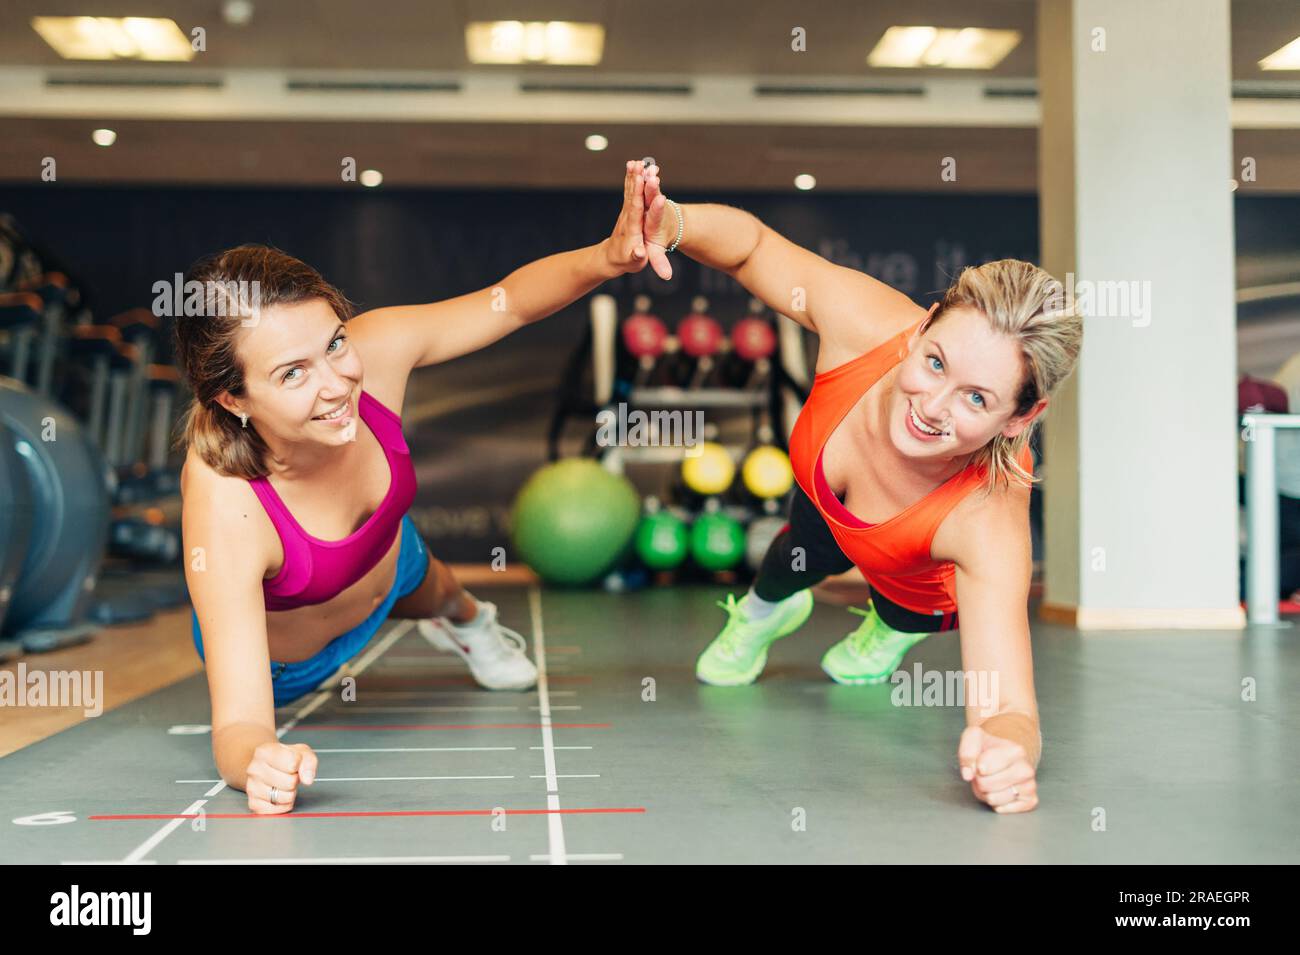 Young fit women working together in gym club Stock Photo